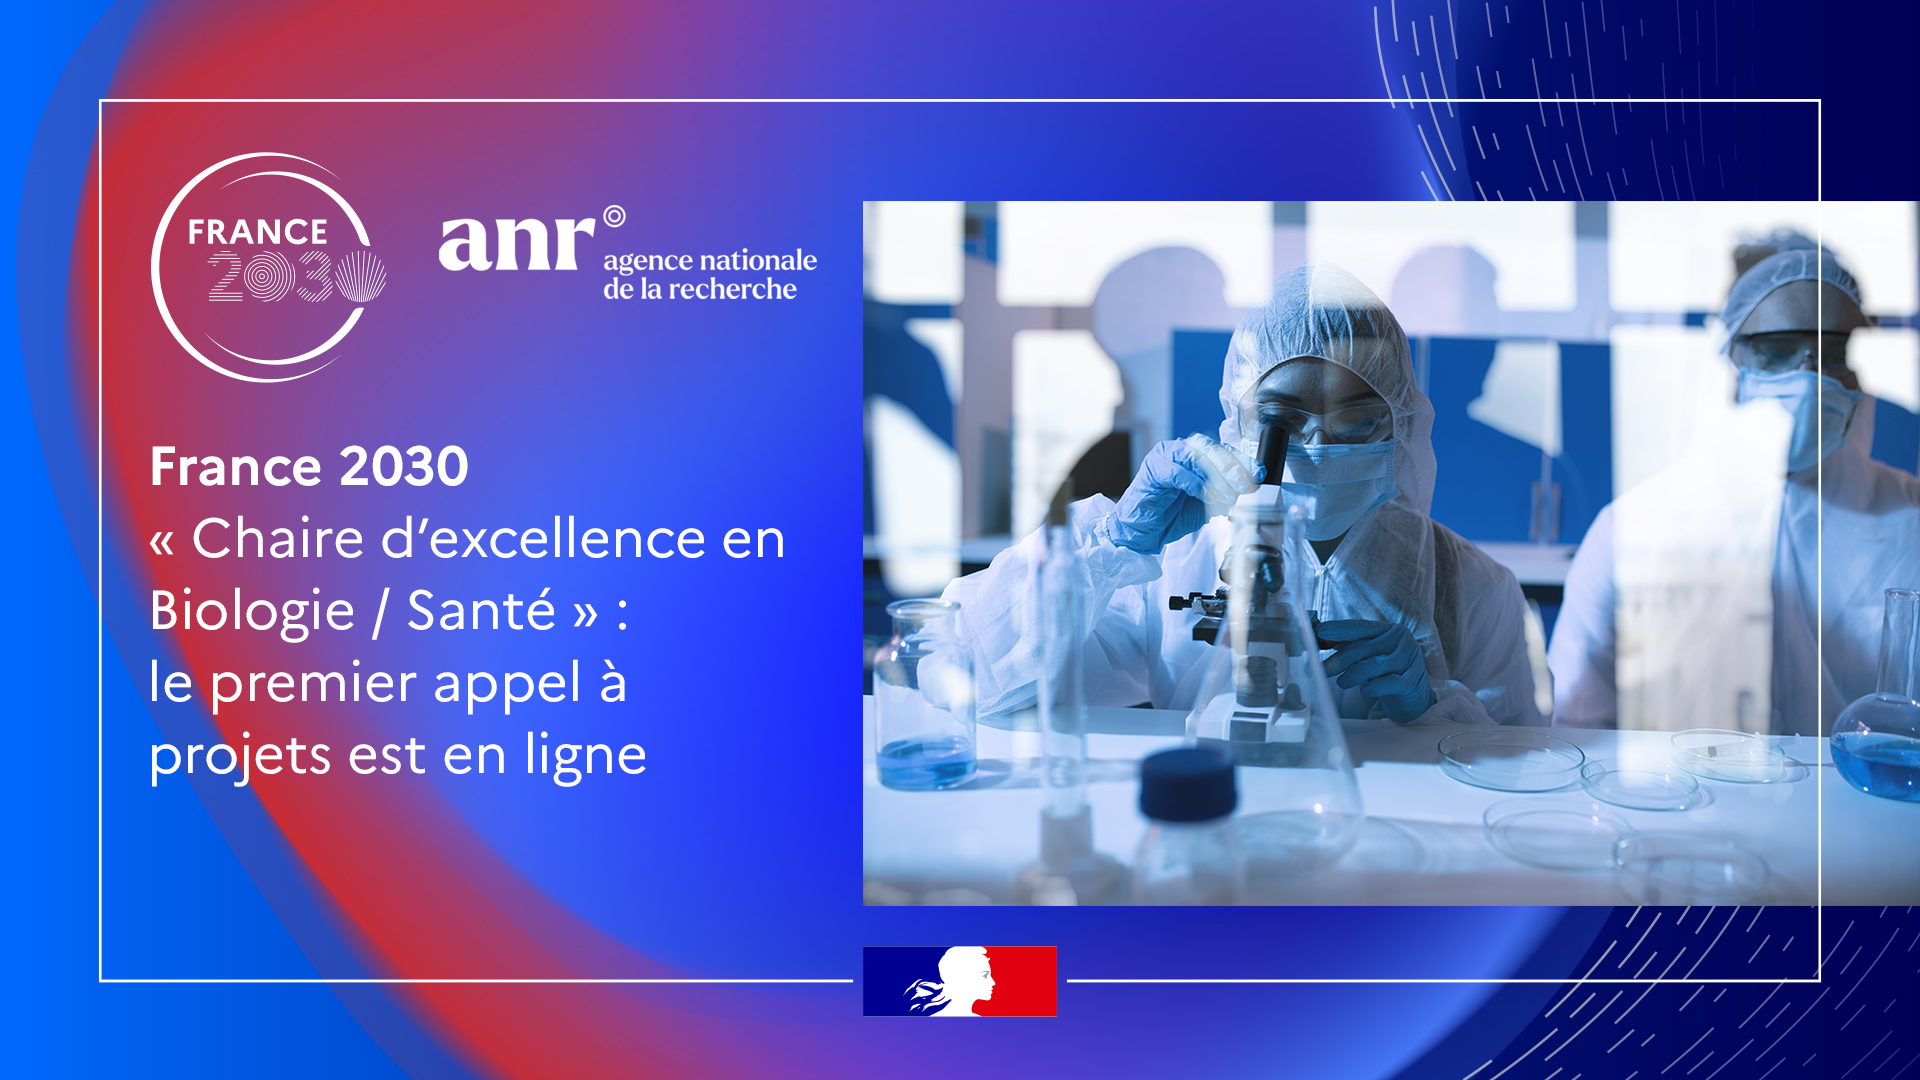 anr chaires d'excellence